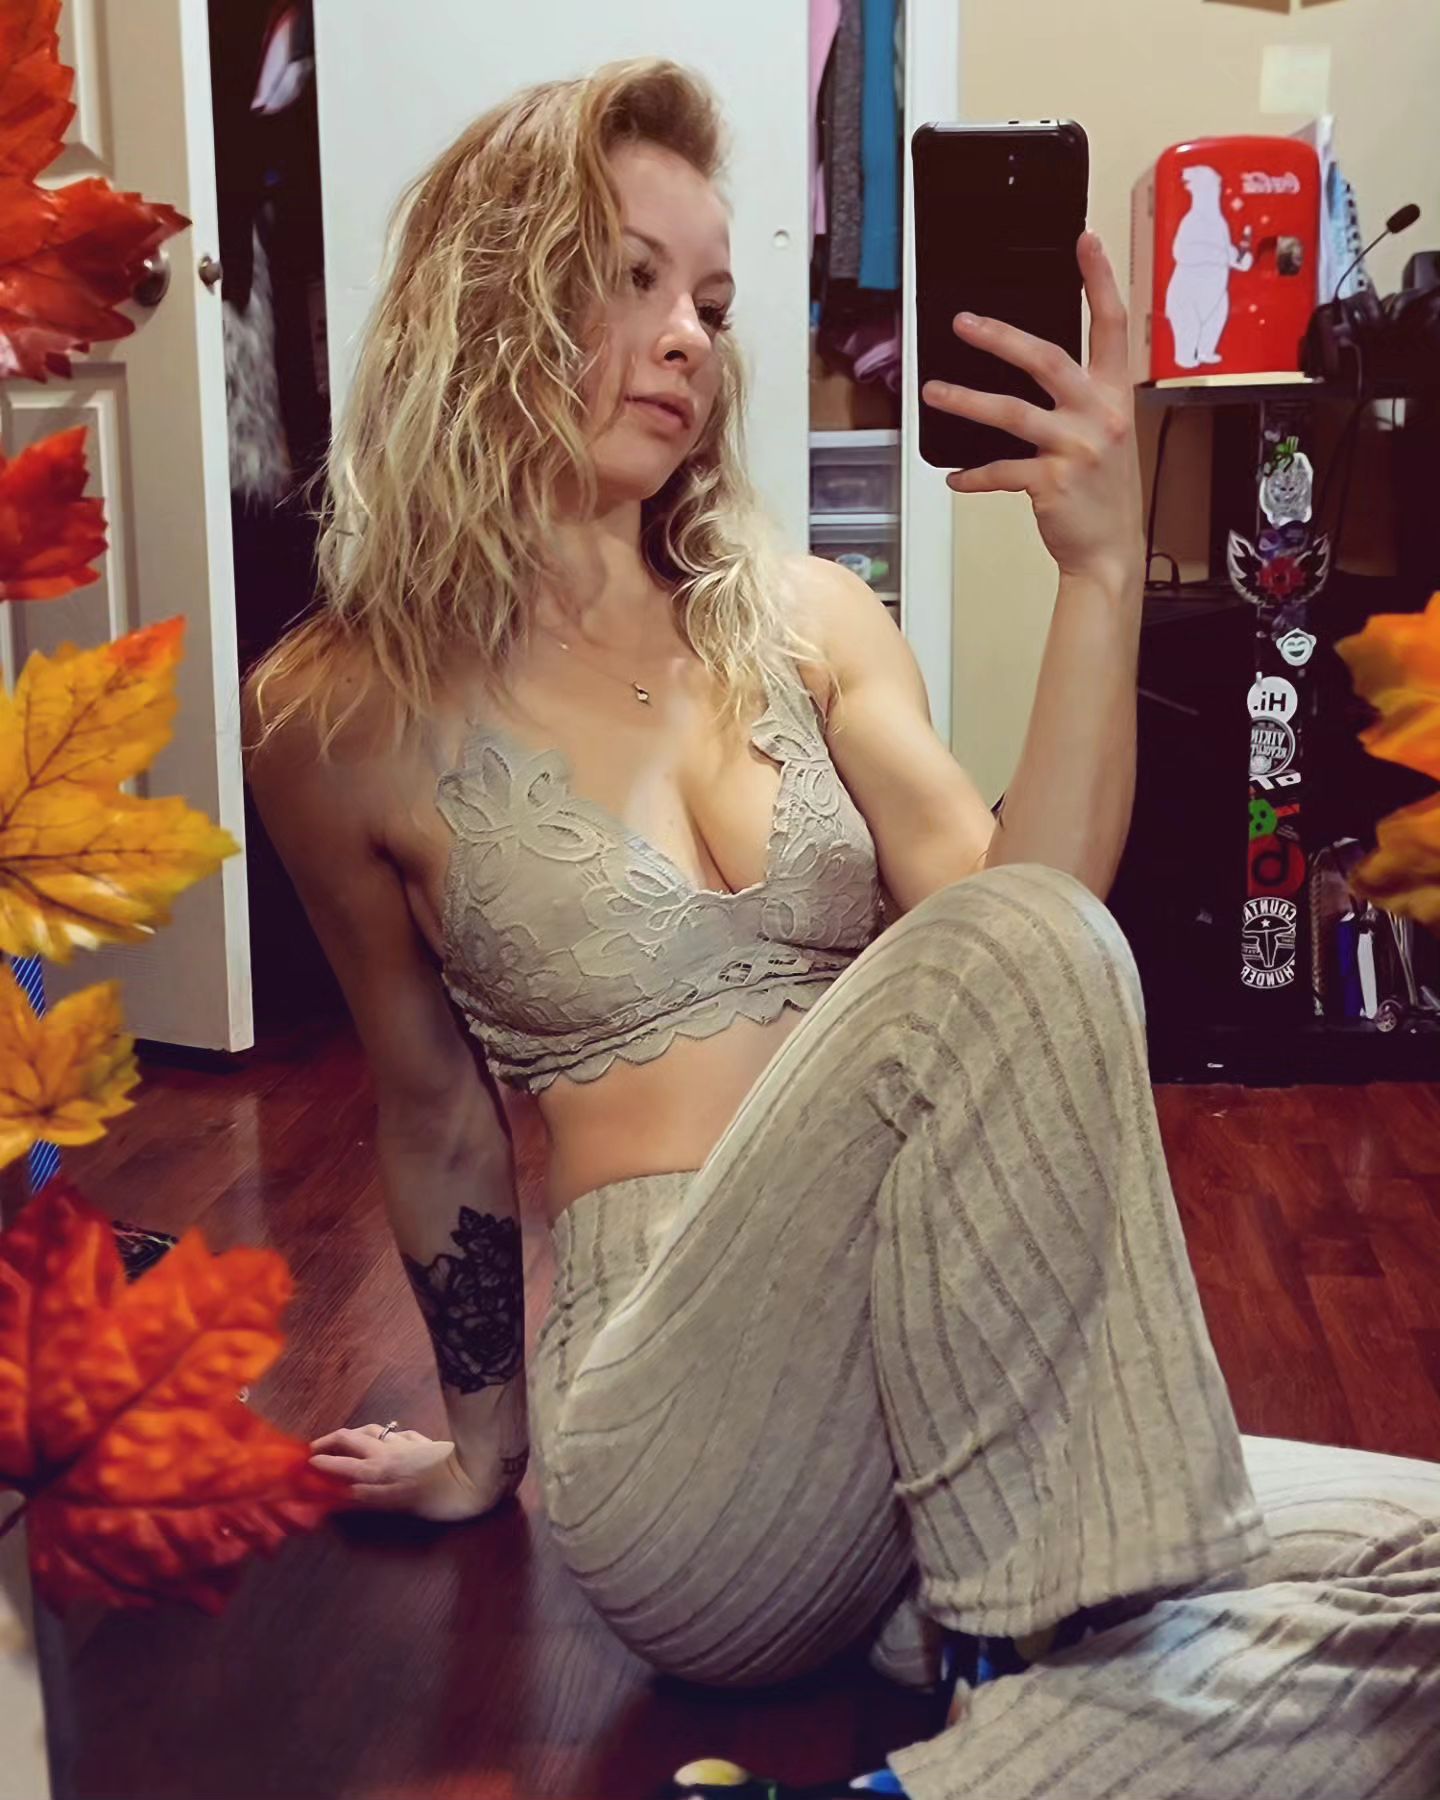 I forgot about this app again

Pants by: @sheinofficial
Top by: @hm

#sg #linkinbio #spookyseason #modelmayhem #modelsofig #modelsofinstagram #blondie #halloween #girlsofonlyfans #girlswithtattoos #cutie #gnd #canadianbabe #canadiangirls #canadianmodel #spookyseason #beauty #discover #explore #devil #babes #cutegirls  #mirrorselfie  #fansonly #model  #hotmodel #beautiful #follow #shein #comfy